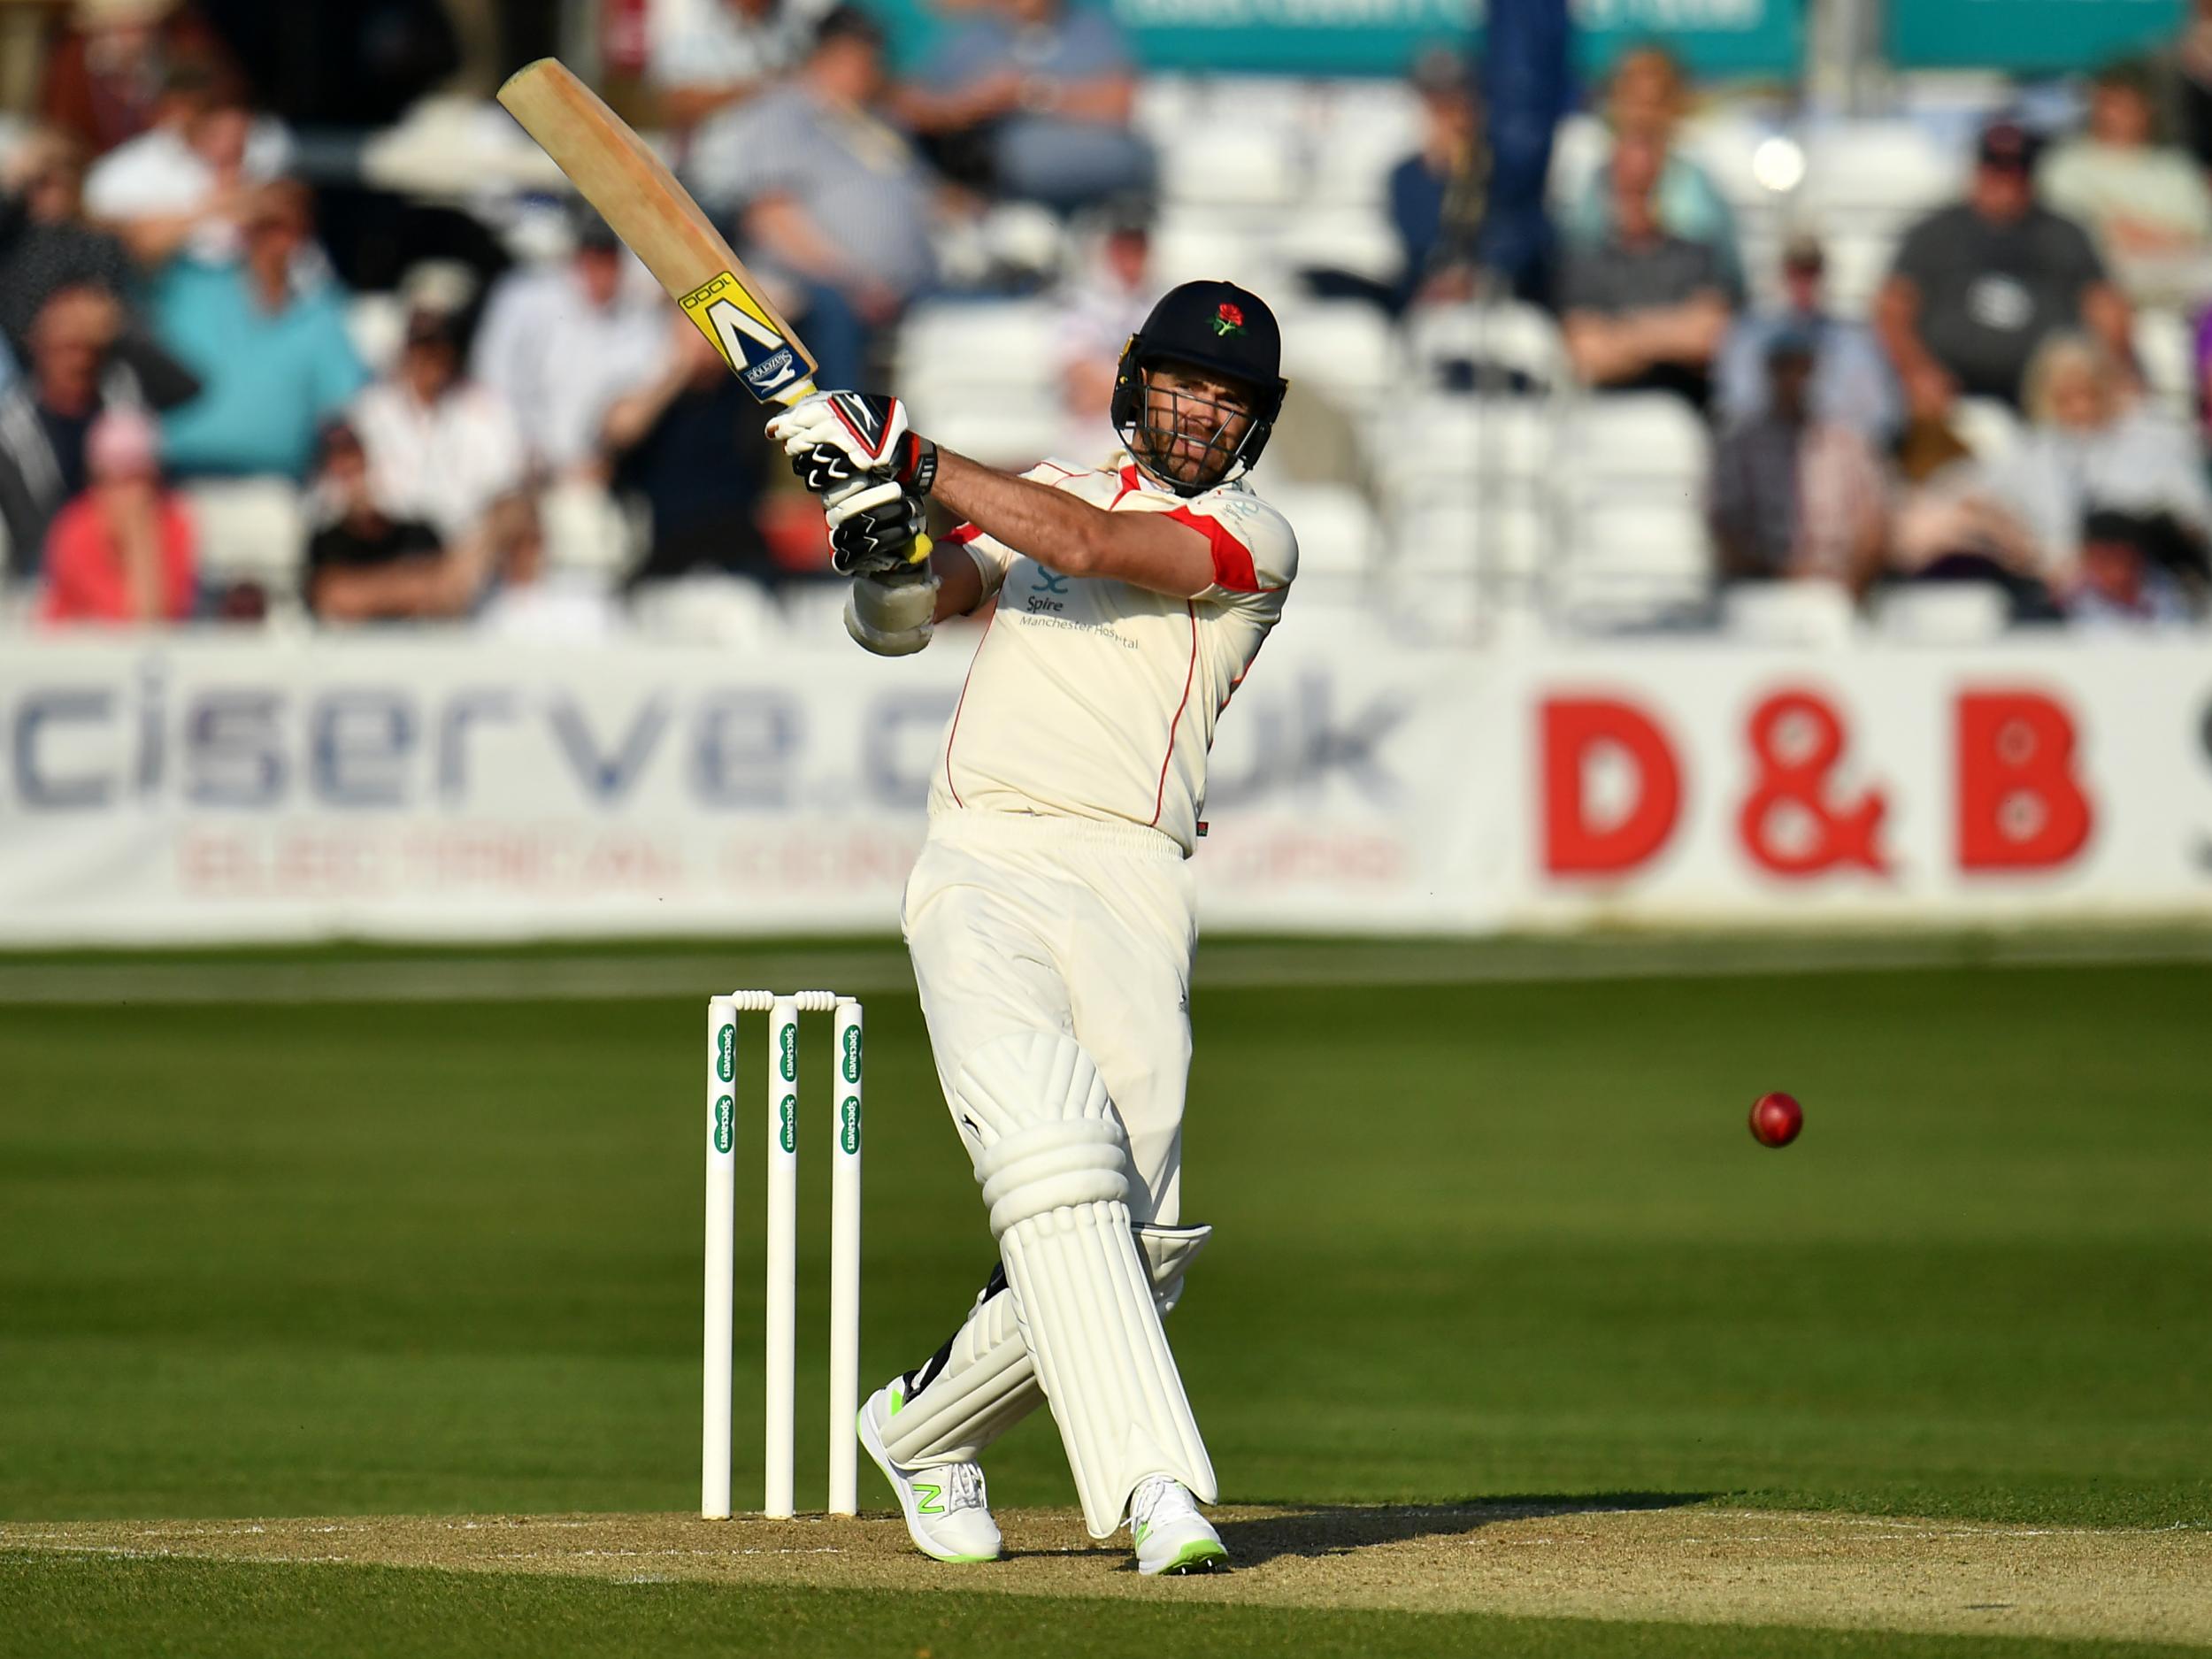 Anderson was delighted to reach the end of Lancashire's opening match without any shoulder pain